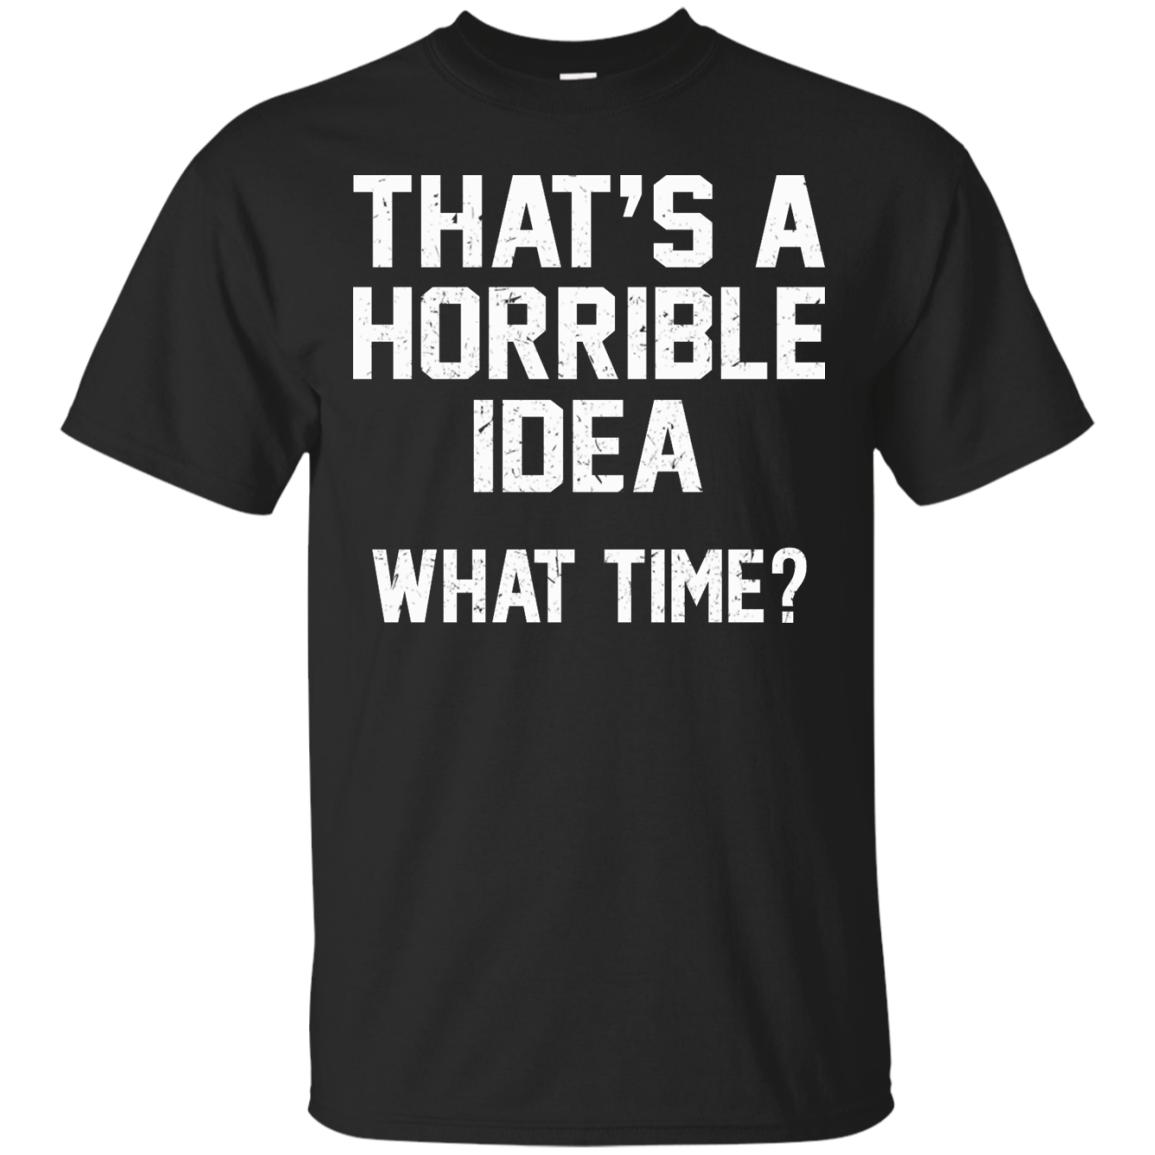 That's A Horrible Idea - What Time? Shirt, Hoodie, Tank - TeeDragons